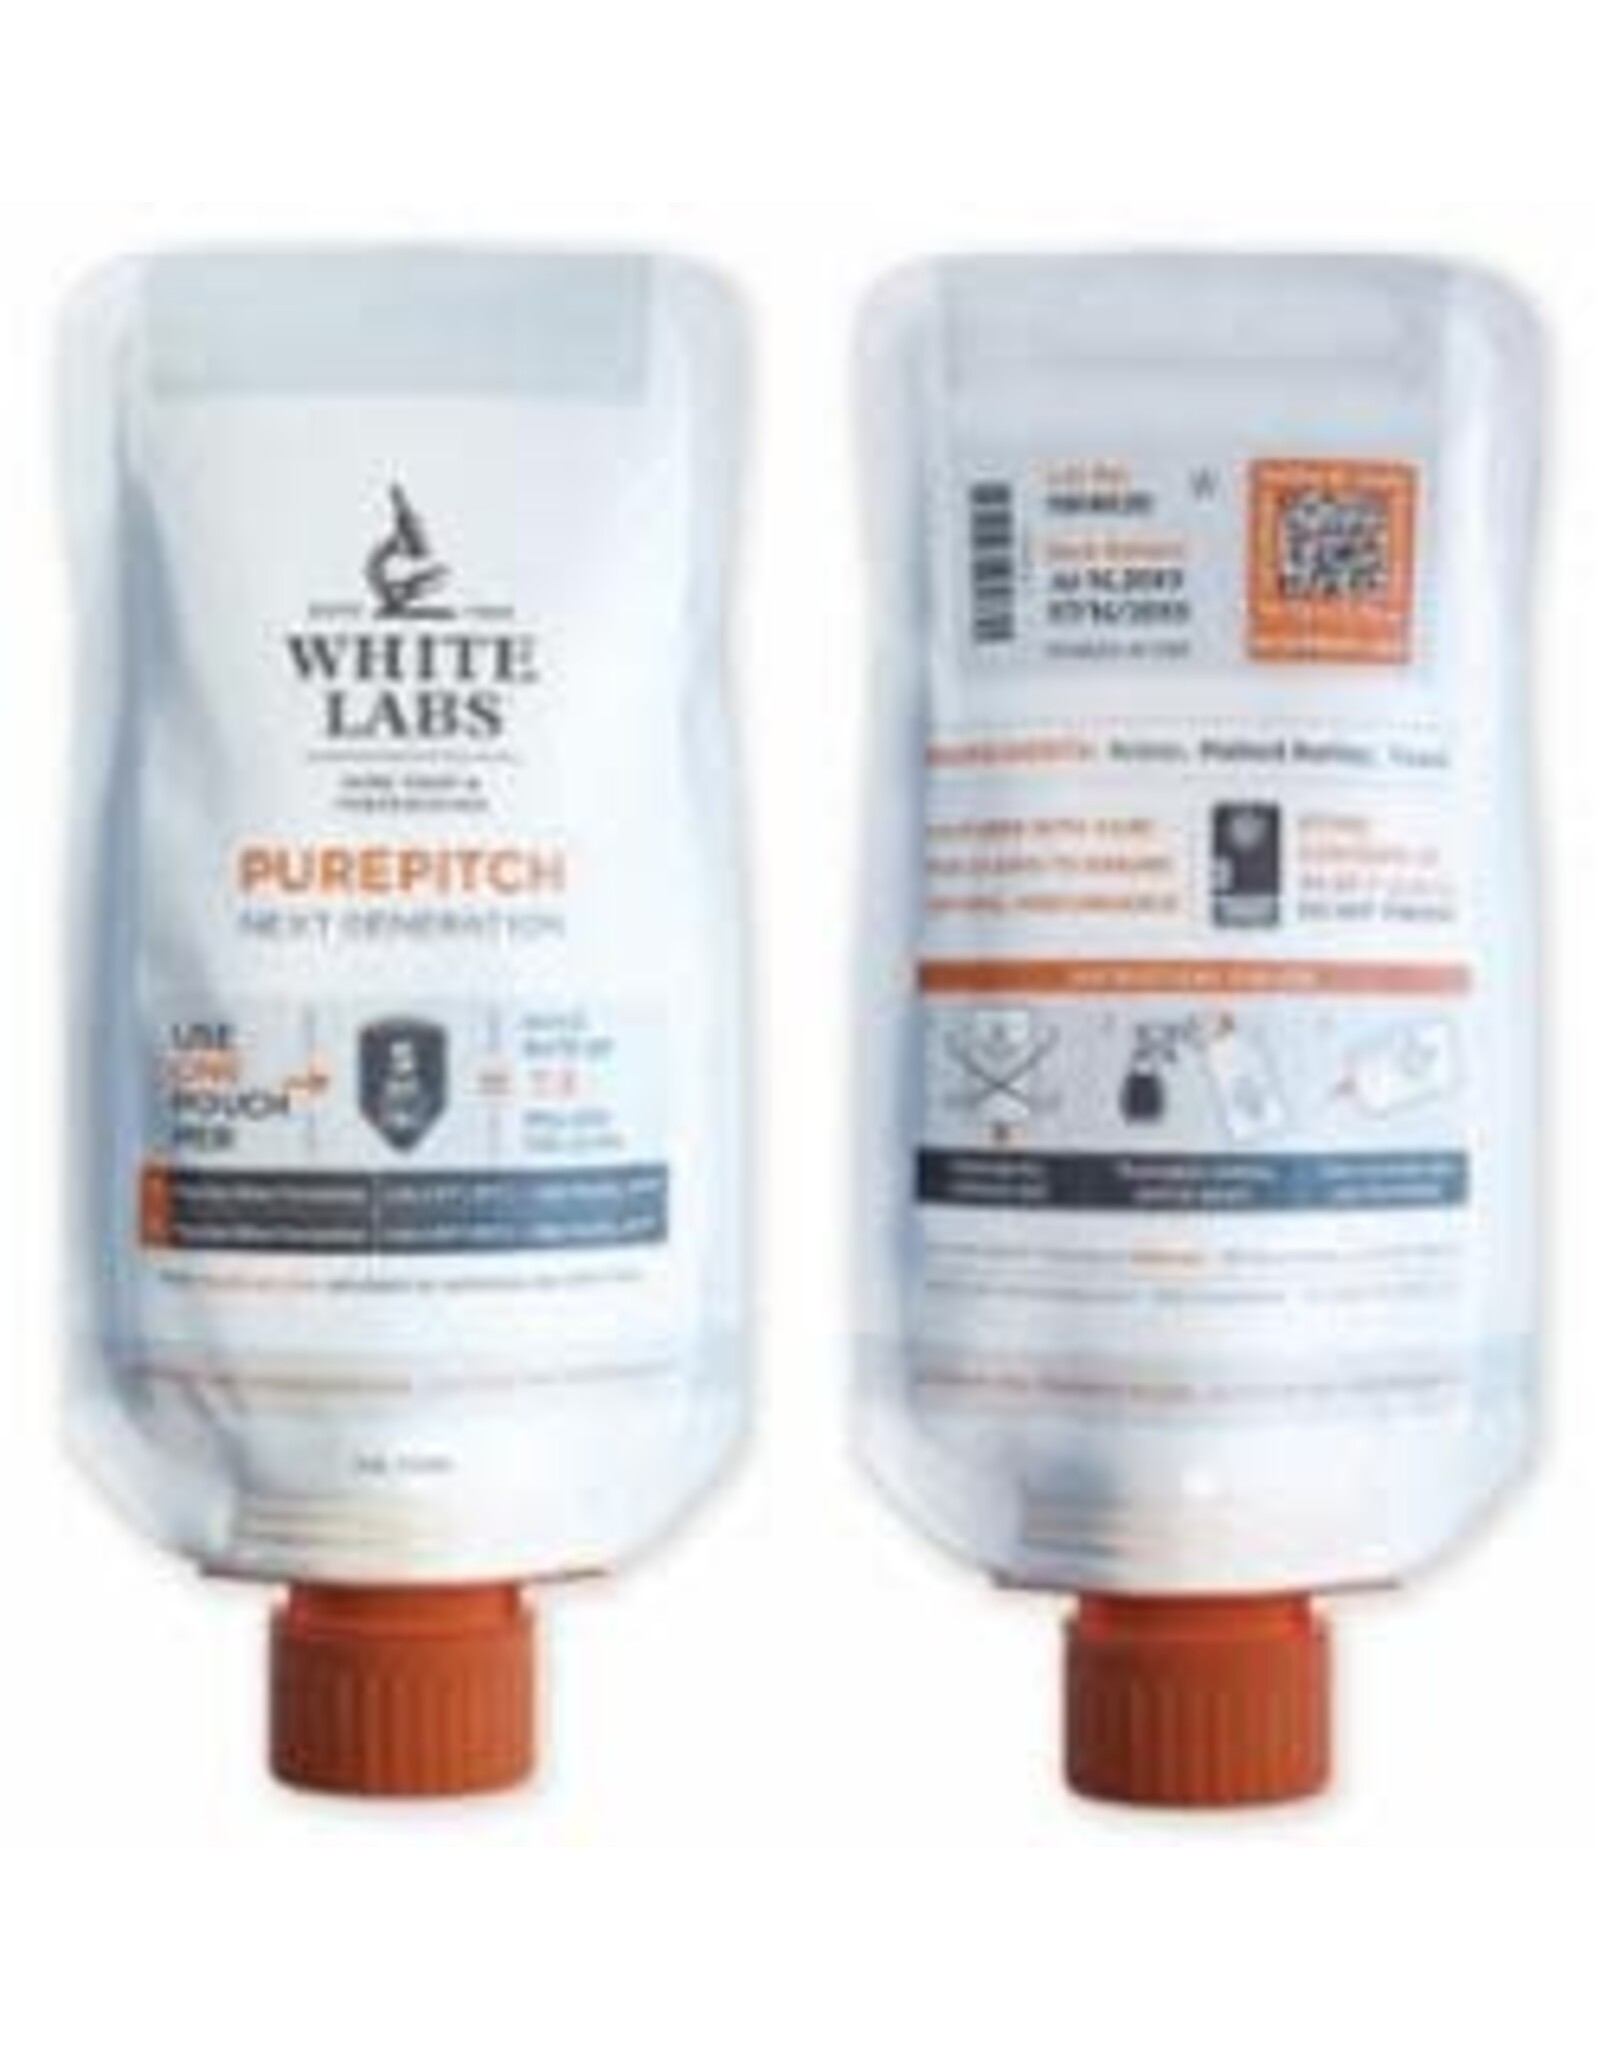 White labs WLP 002  PurePItch® Next Generation English Ale Yeast